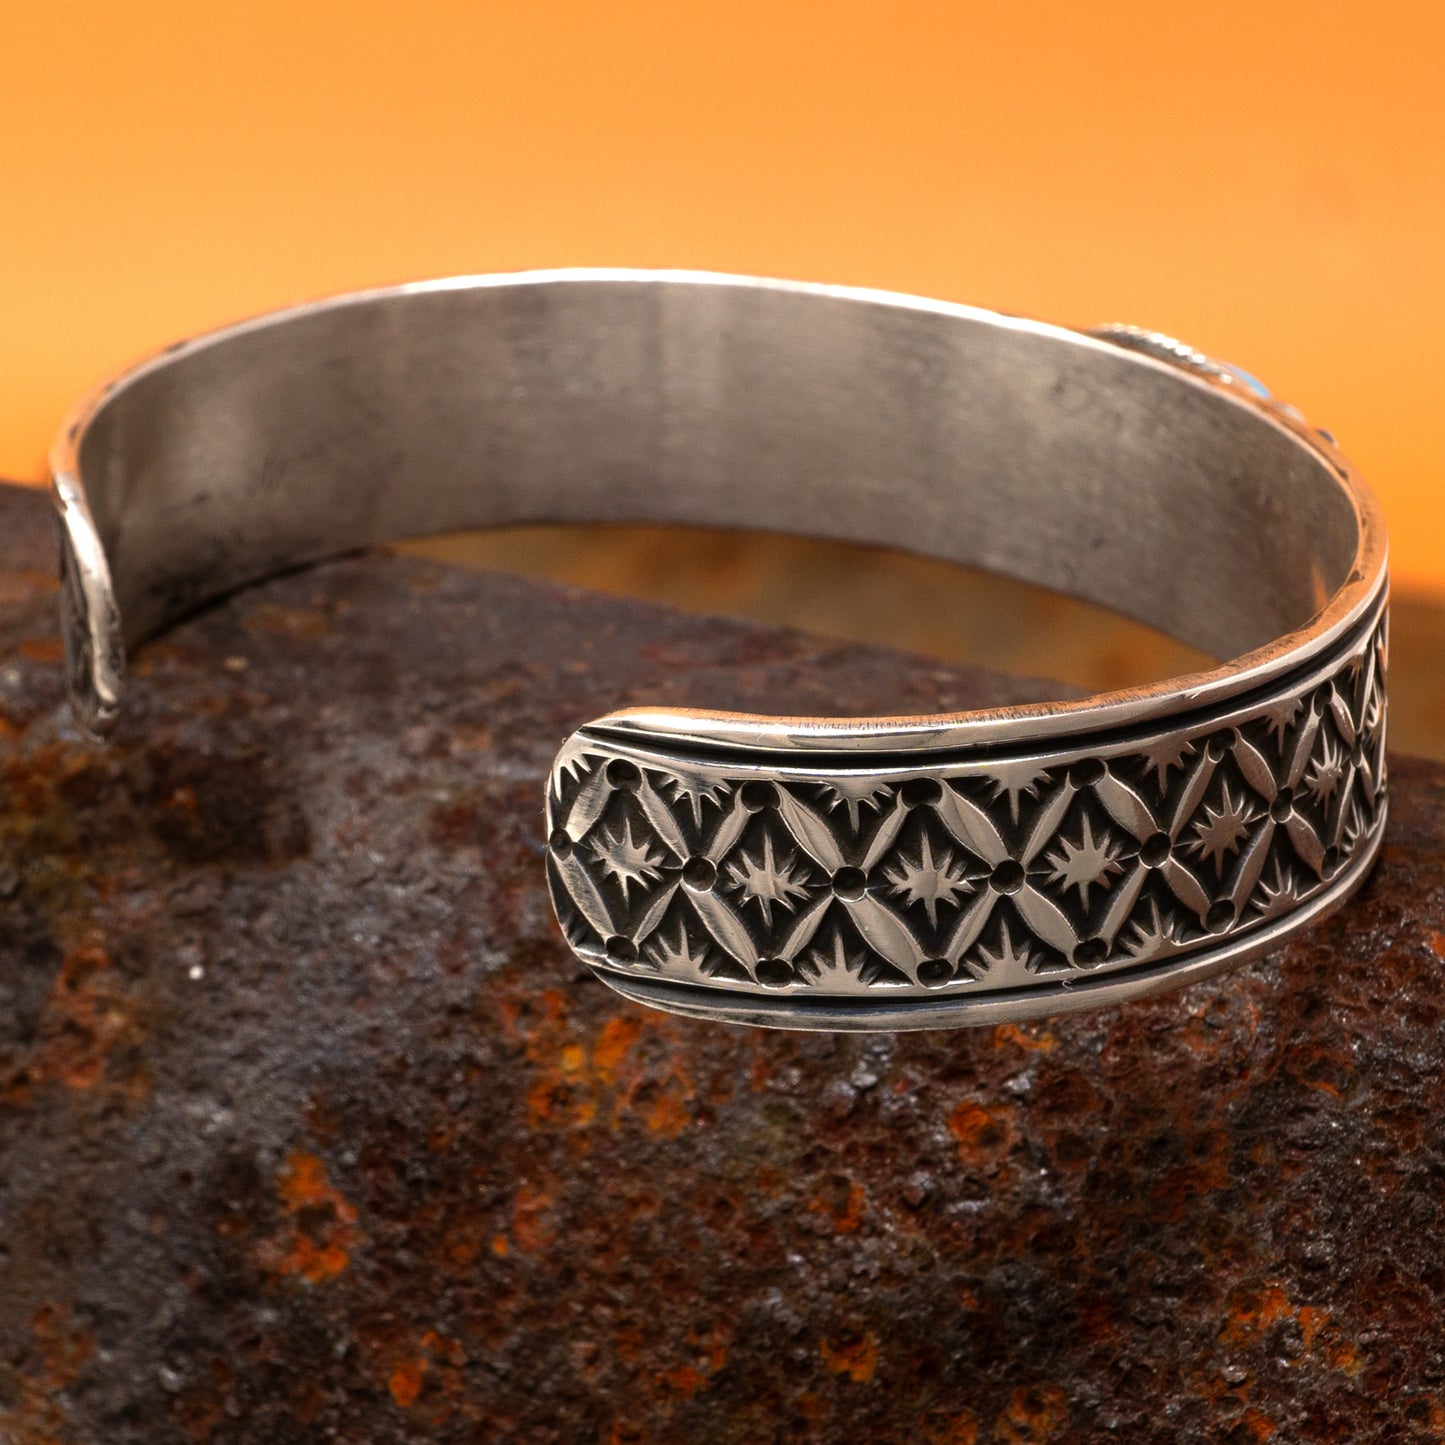 Apache Blue Turquoise in Stamped Silver Cuff Bracelet | Bo Reeves